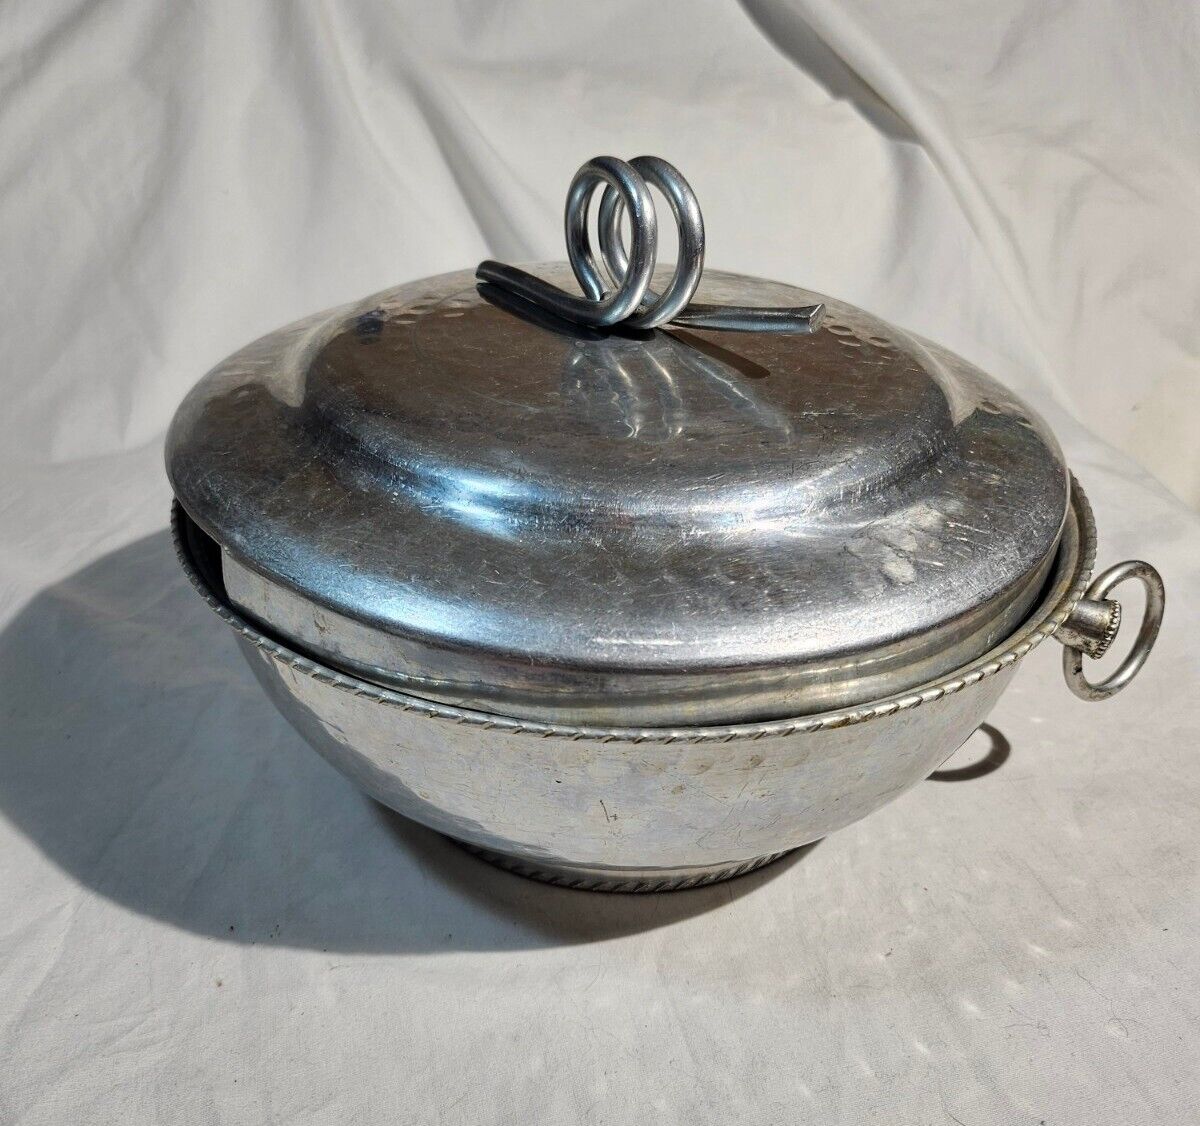 Vintage Hammered Aluminum Casserole Cover/Carrier with Lid Serving Dish 🔥